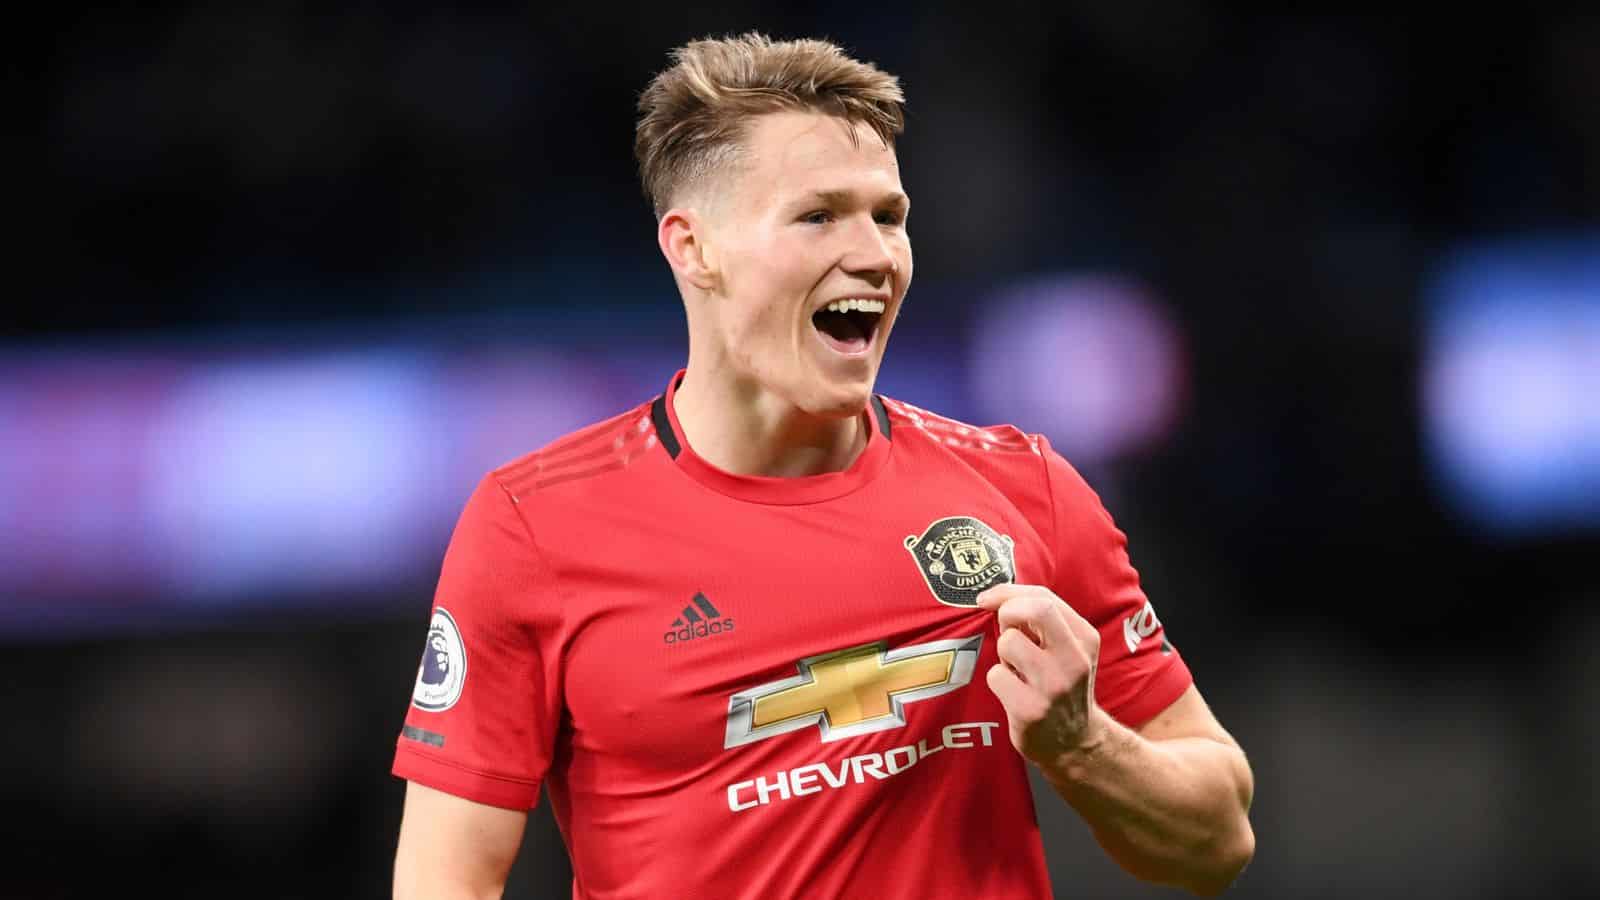 Scott McTominay’s extra-time goal books spot in FA Cup sixth round